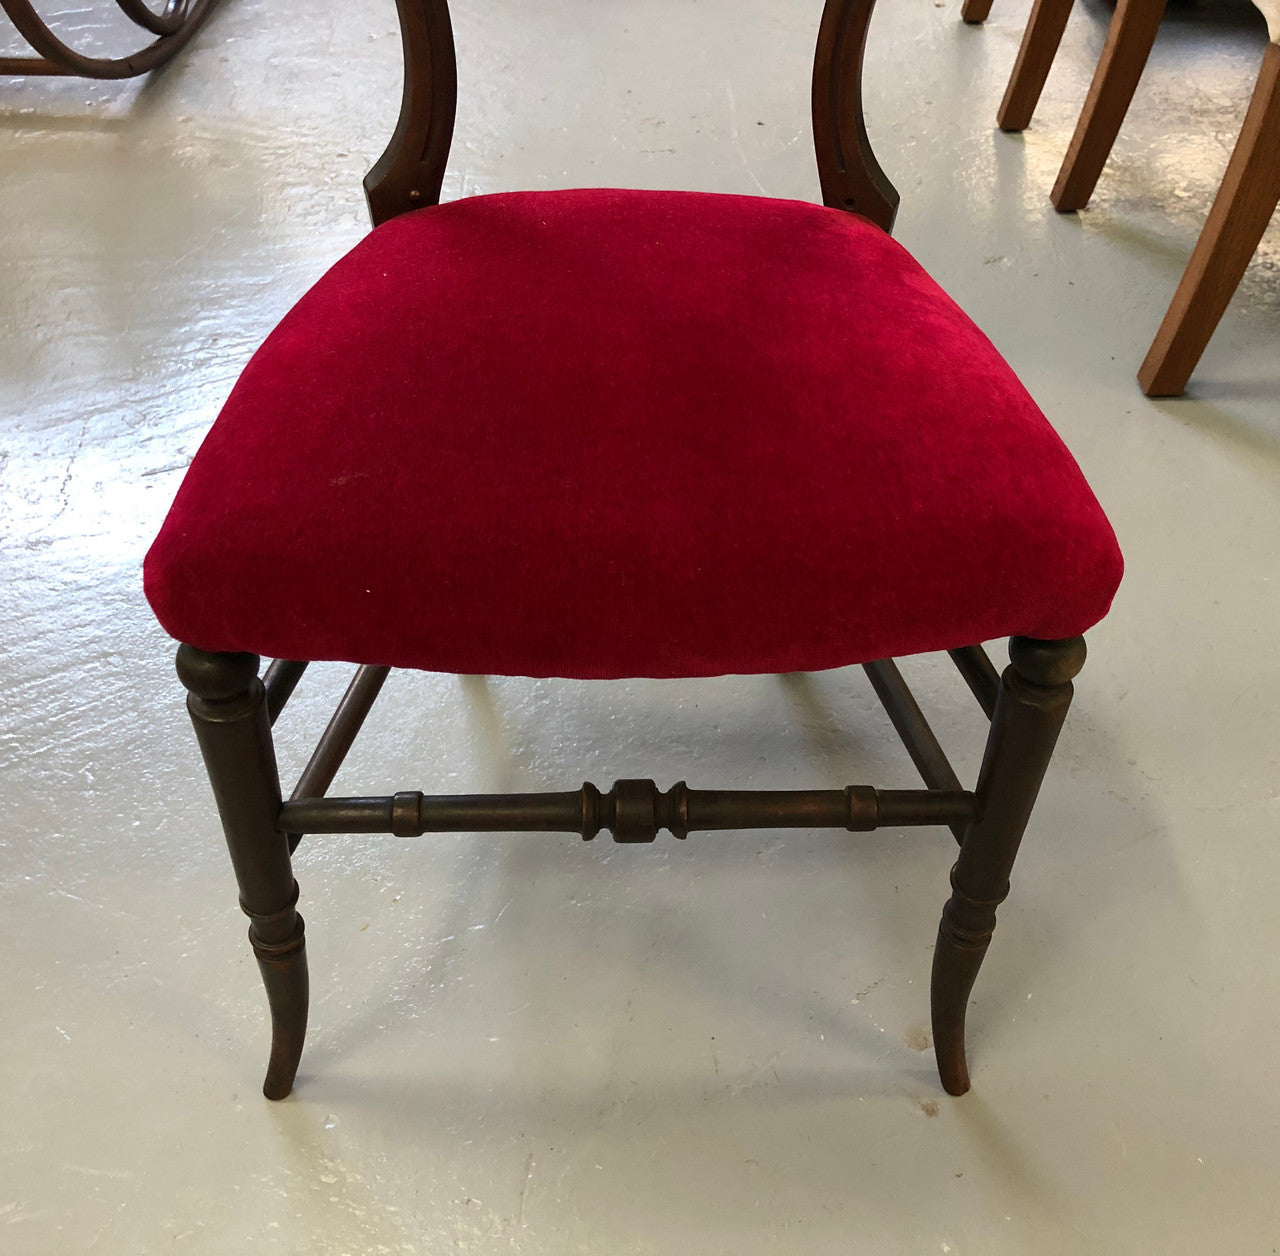 Edwardian Bedroom Chair With Red Upholstery